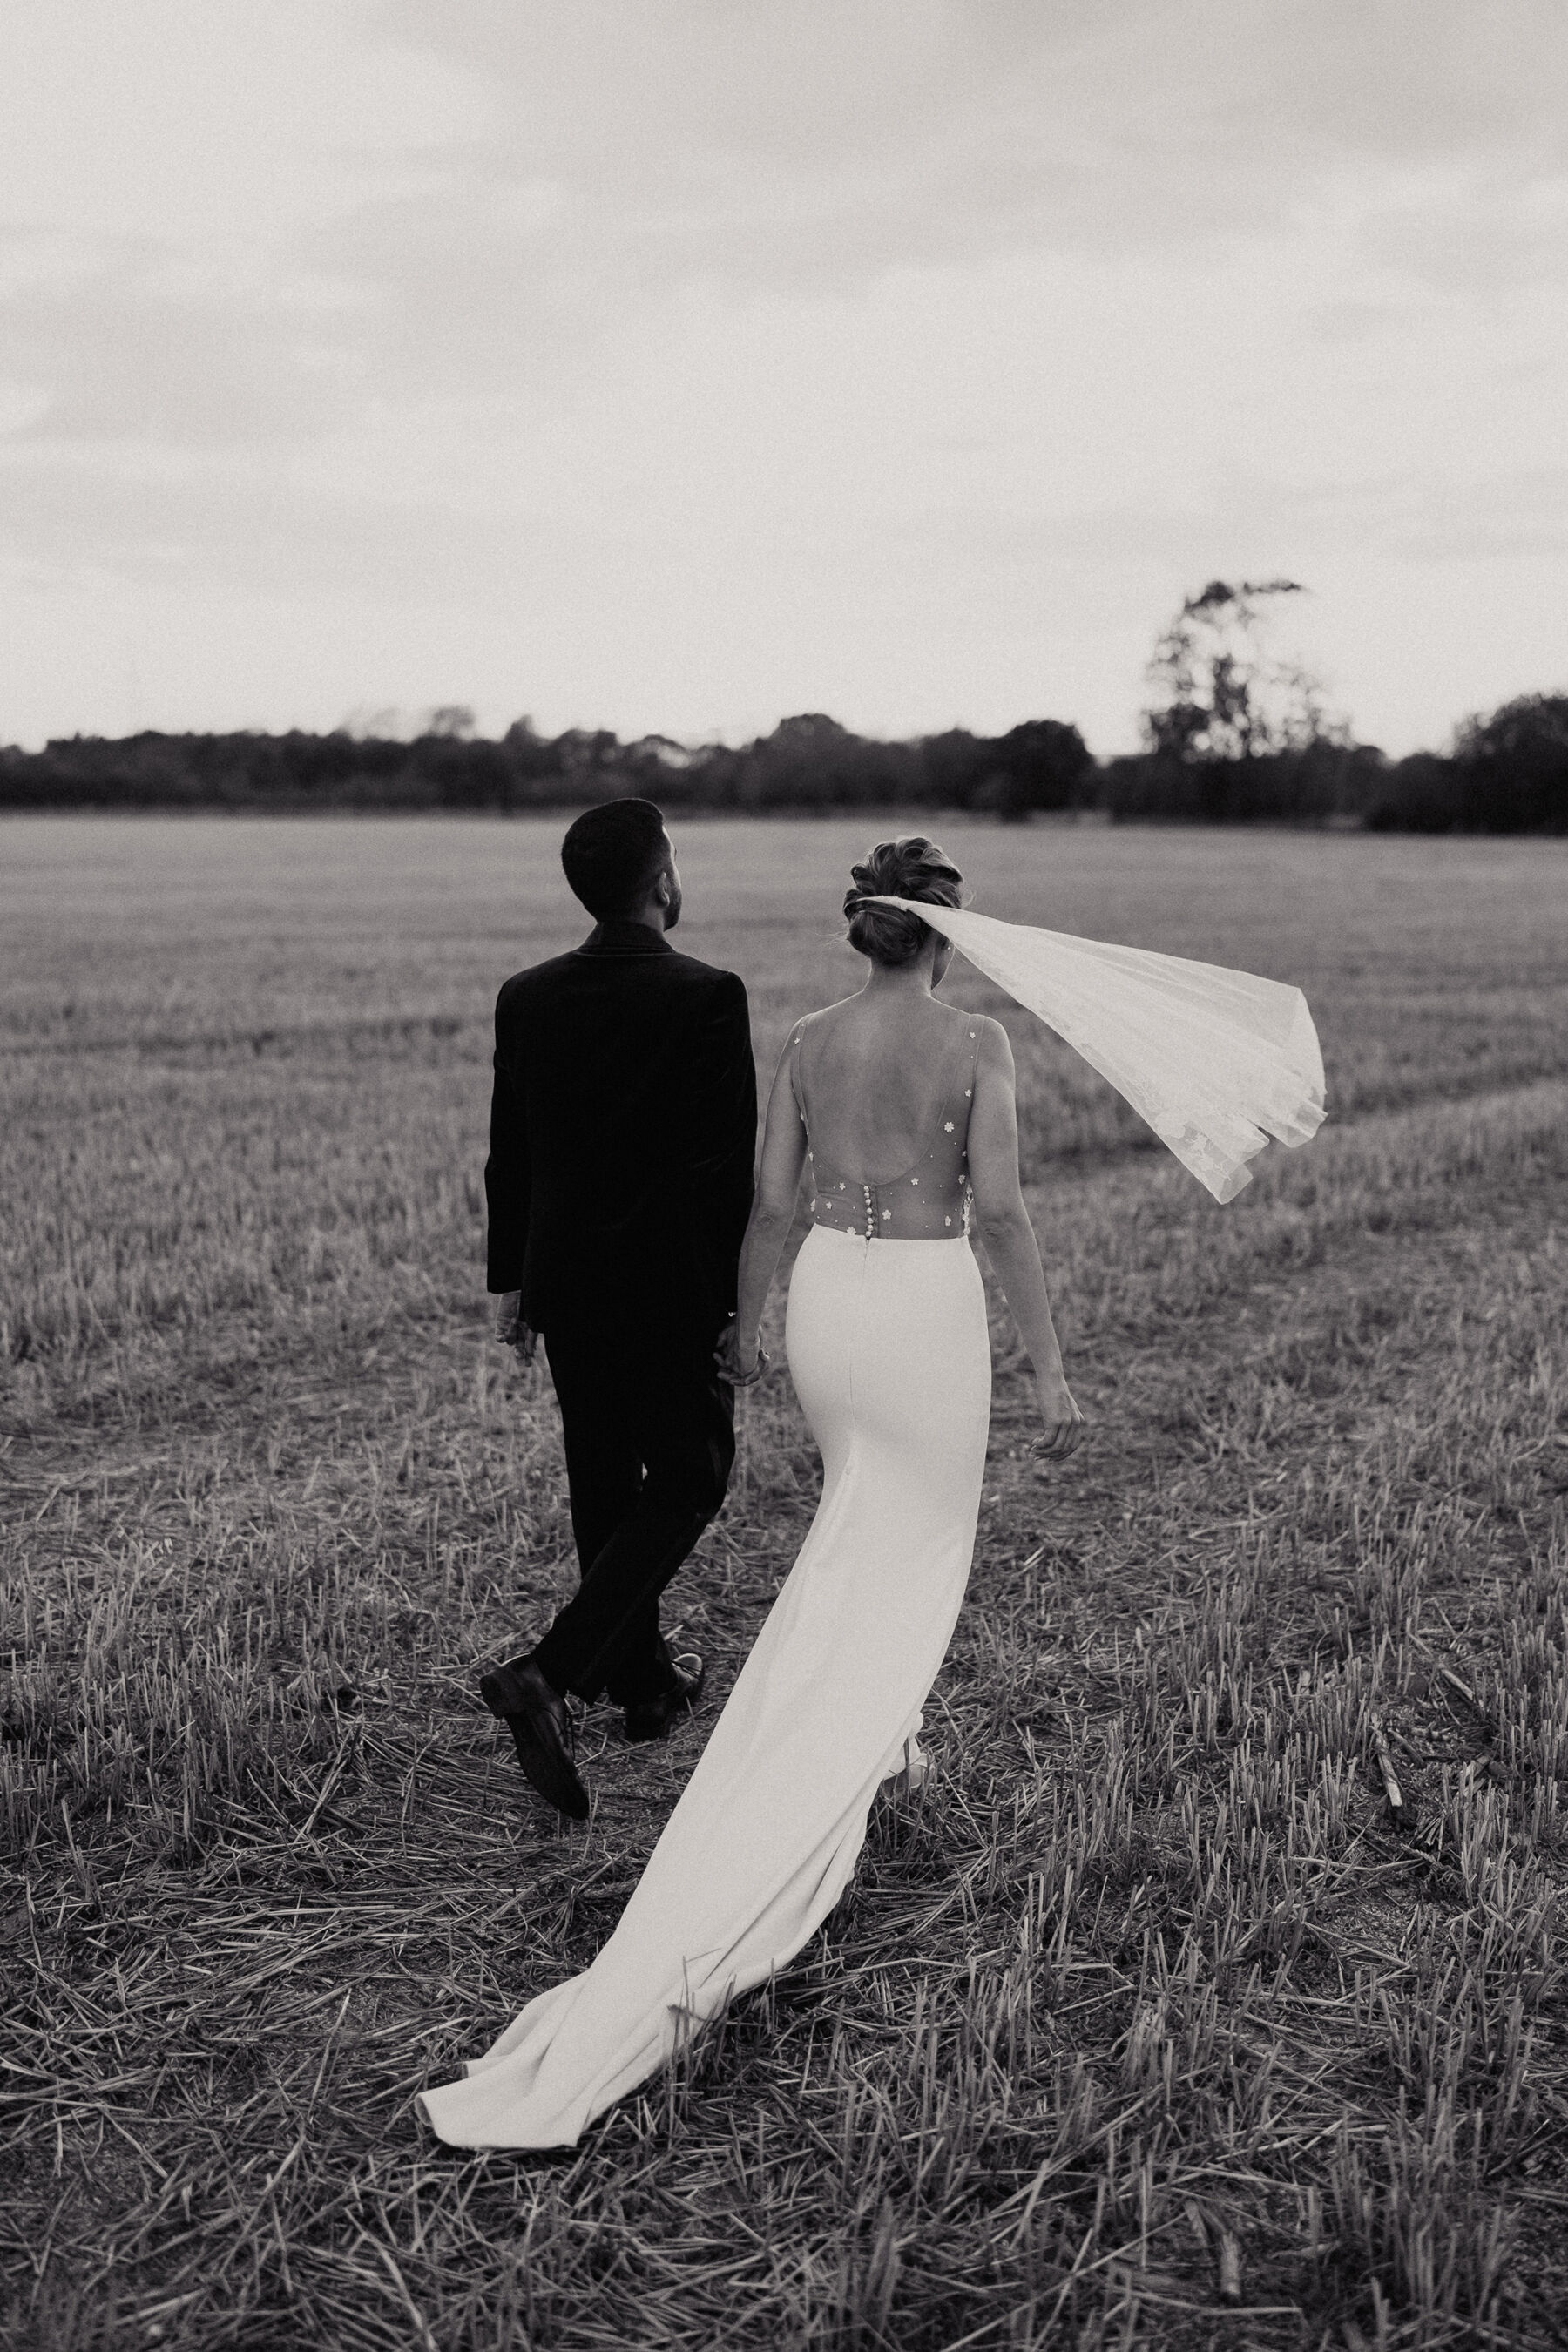 Black and white image of glamorous bride and groom in a field. Bride's short veil is flying away in the breeze.